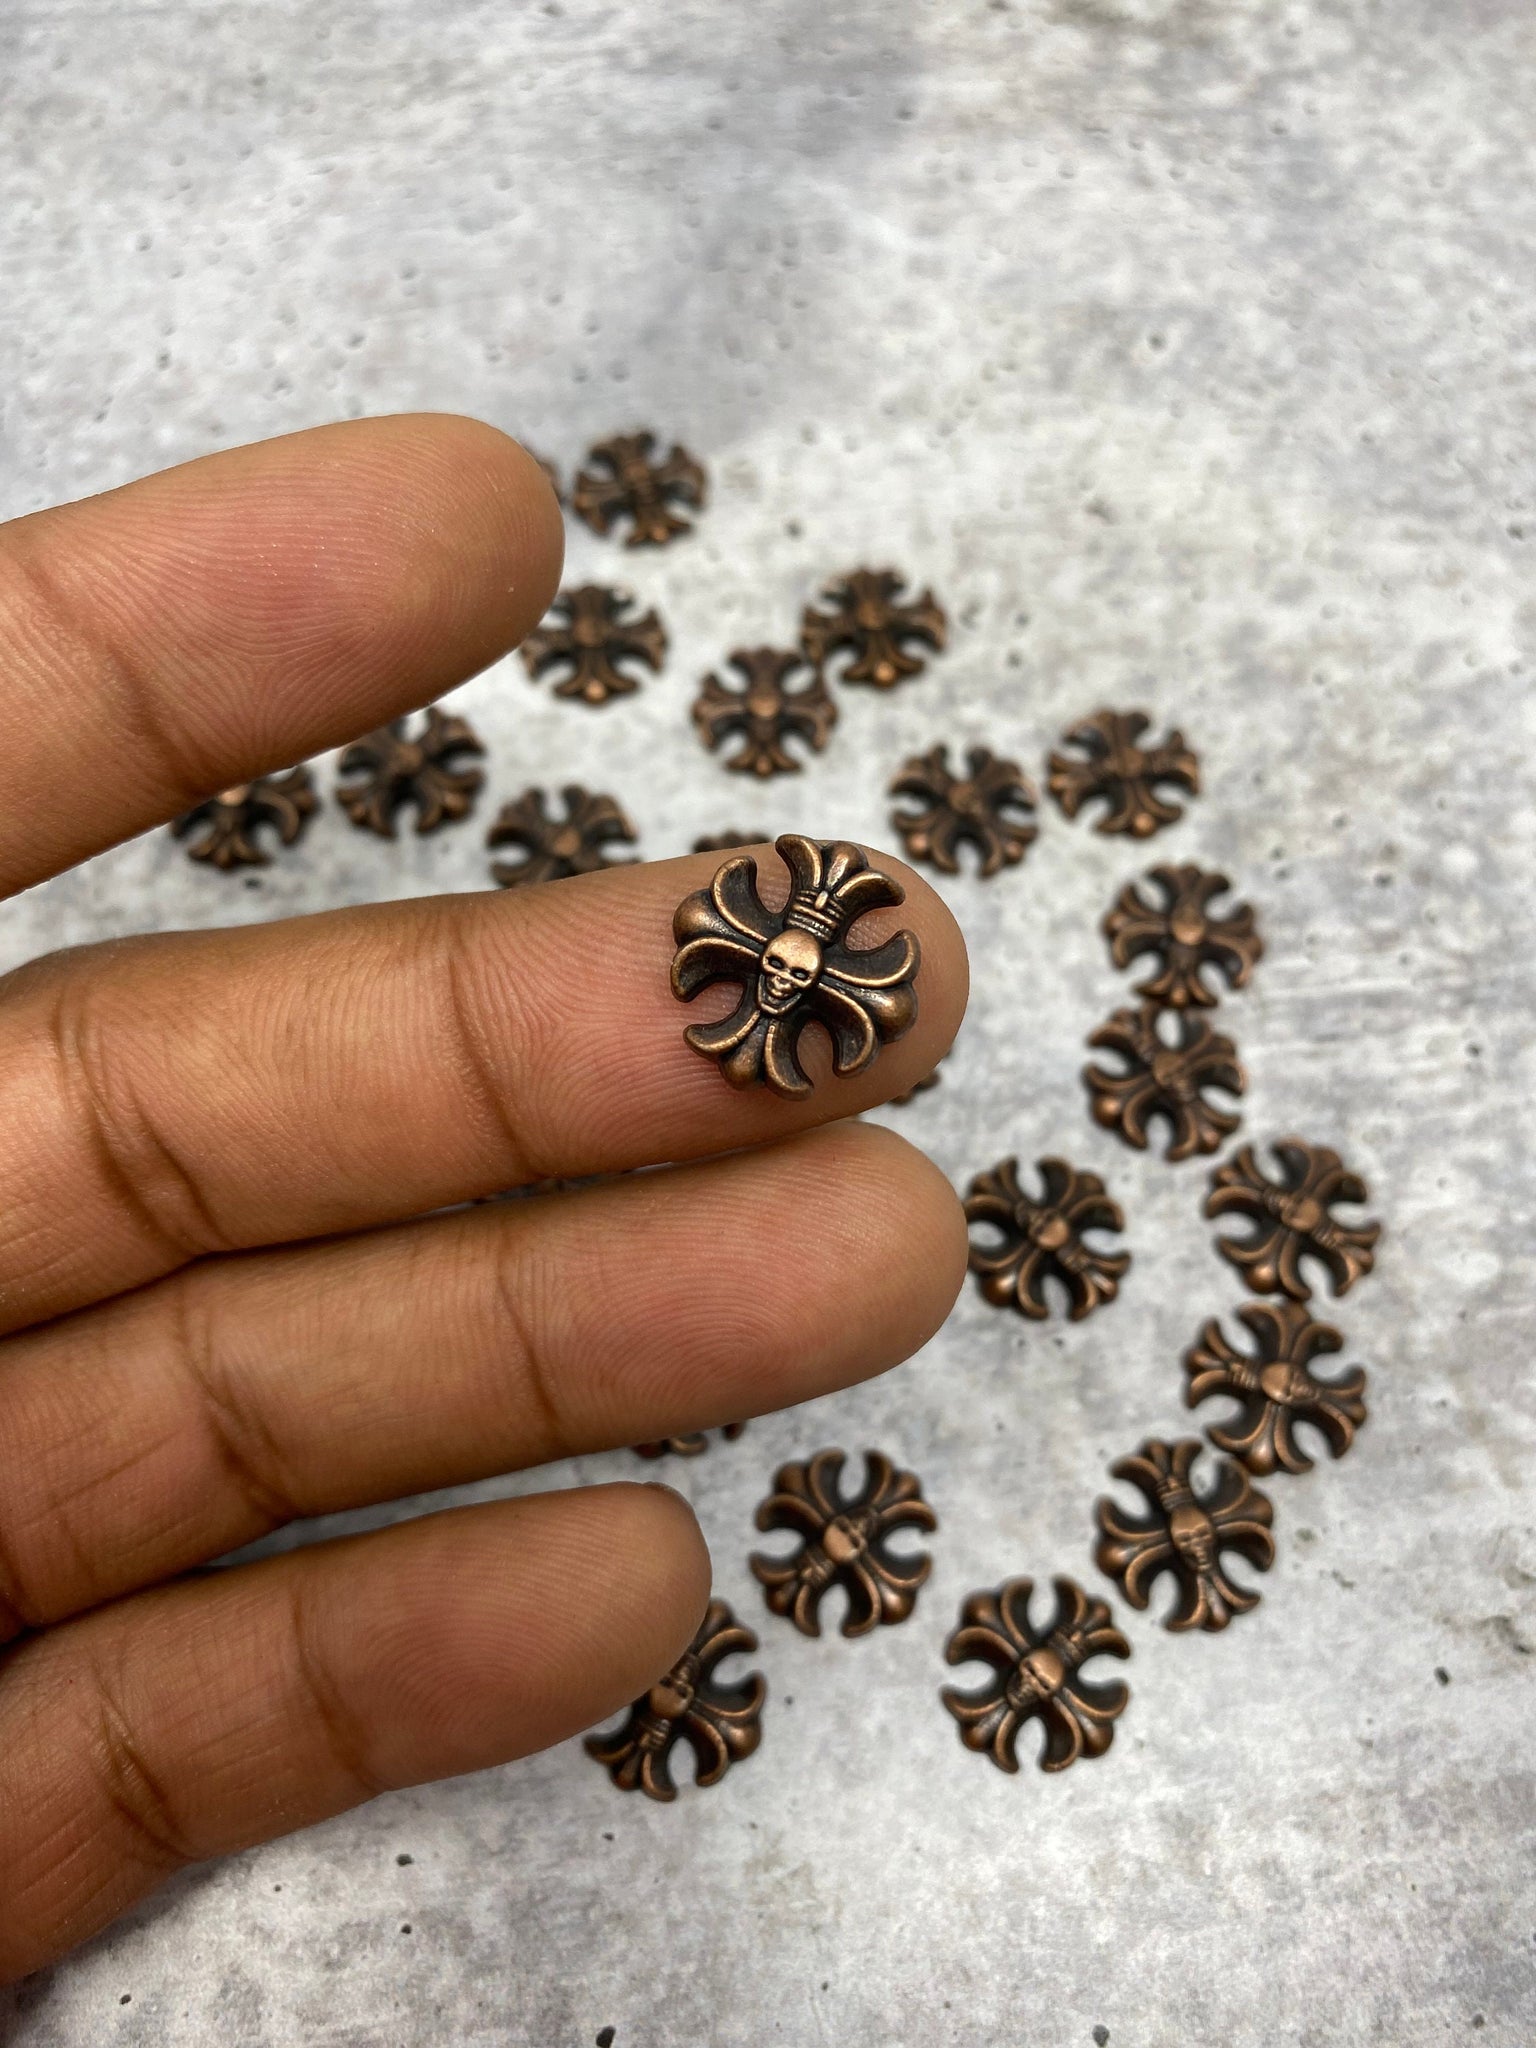 NEW, Hotfix Rusted Chrome Royal Cross Studs, 100 Pcs,(One Size), Great for Denim, Sweaters, Camo Jackets, Belts, Bags, Shoes, Crafts,+ MORE!